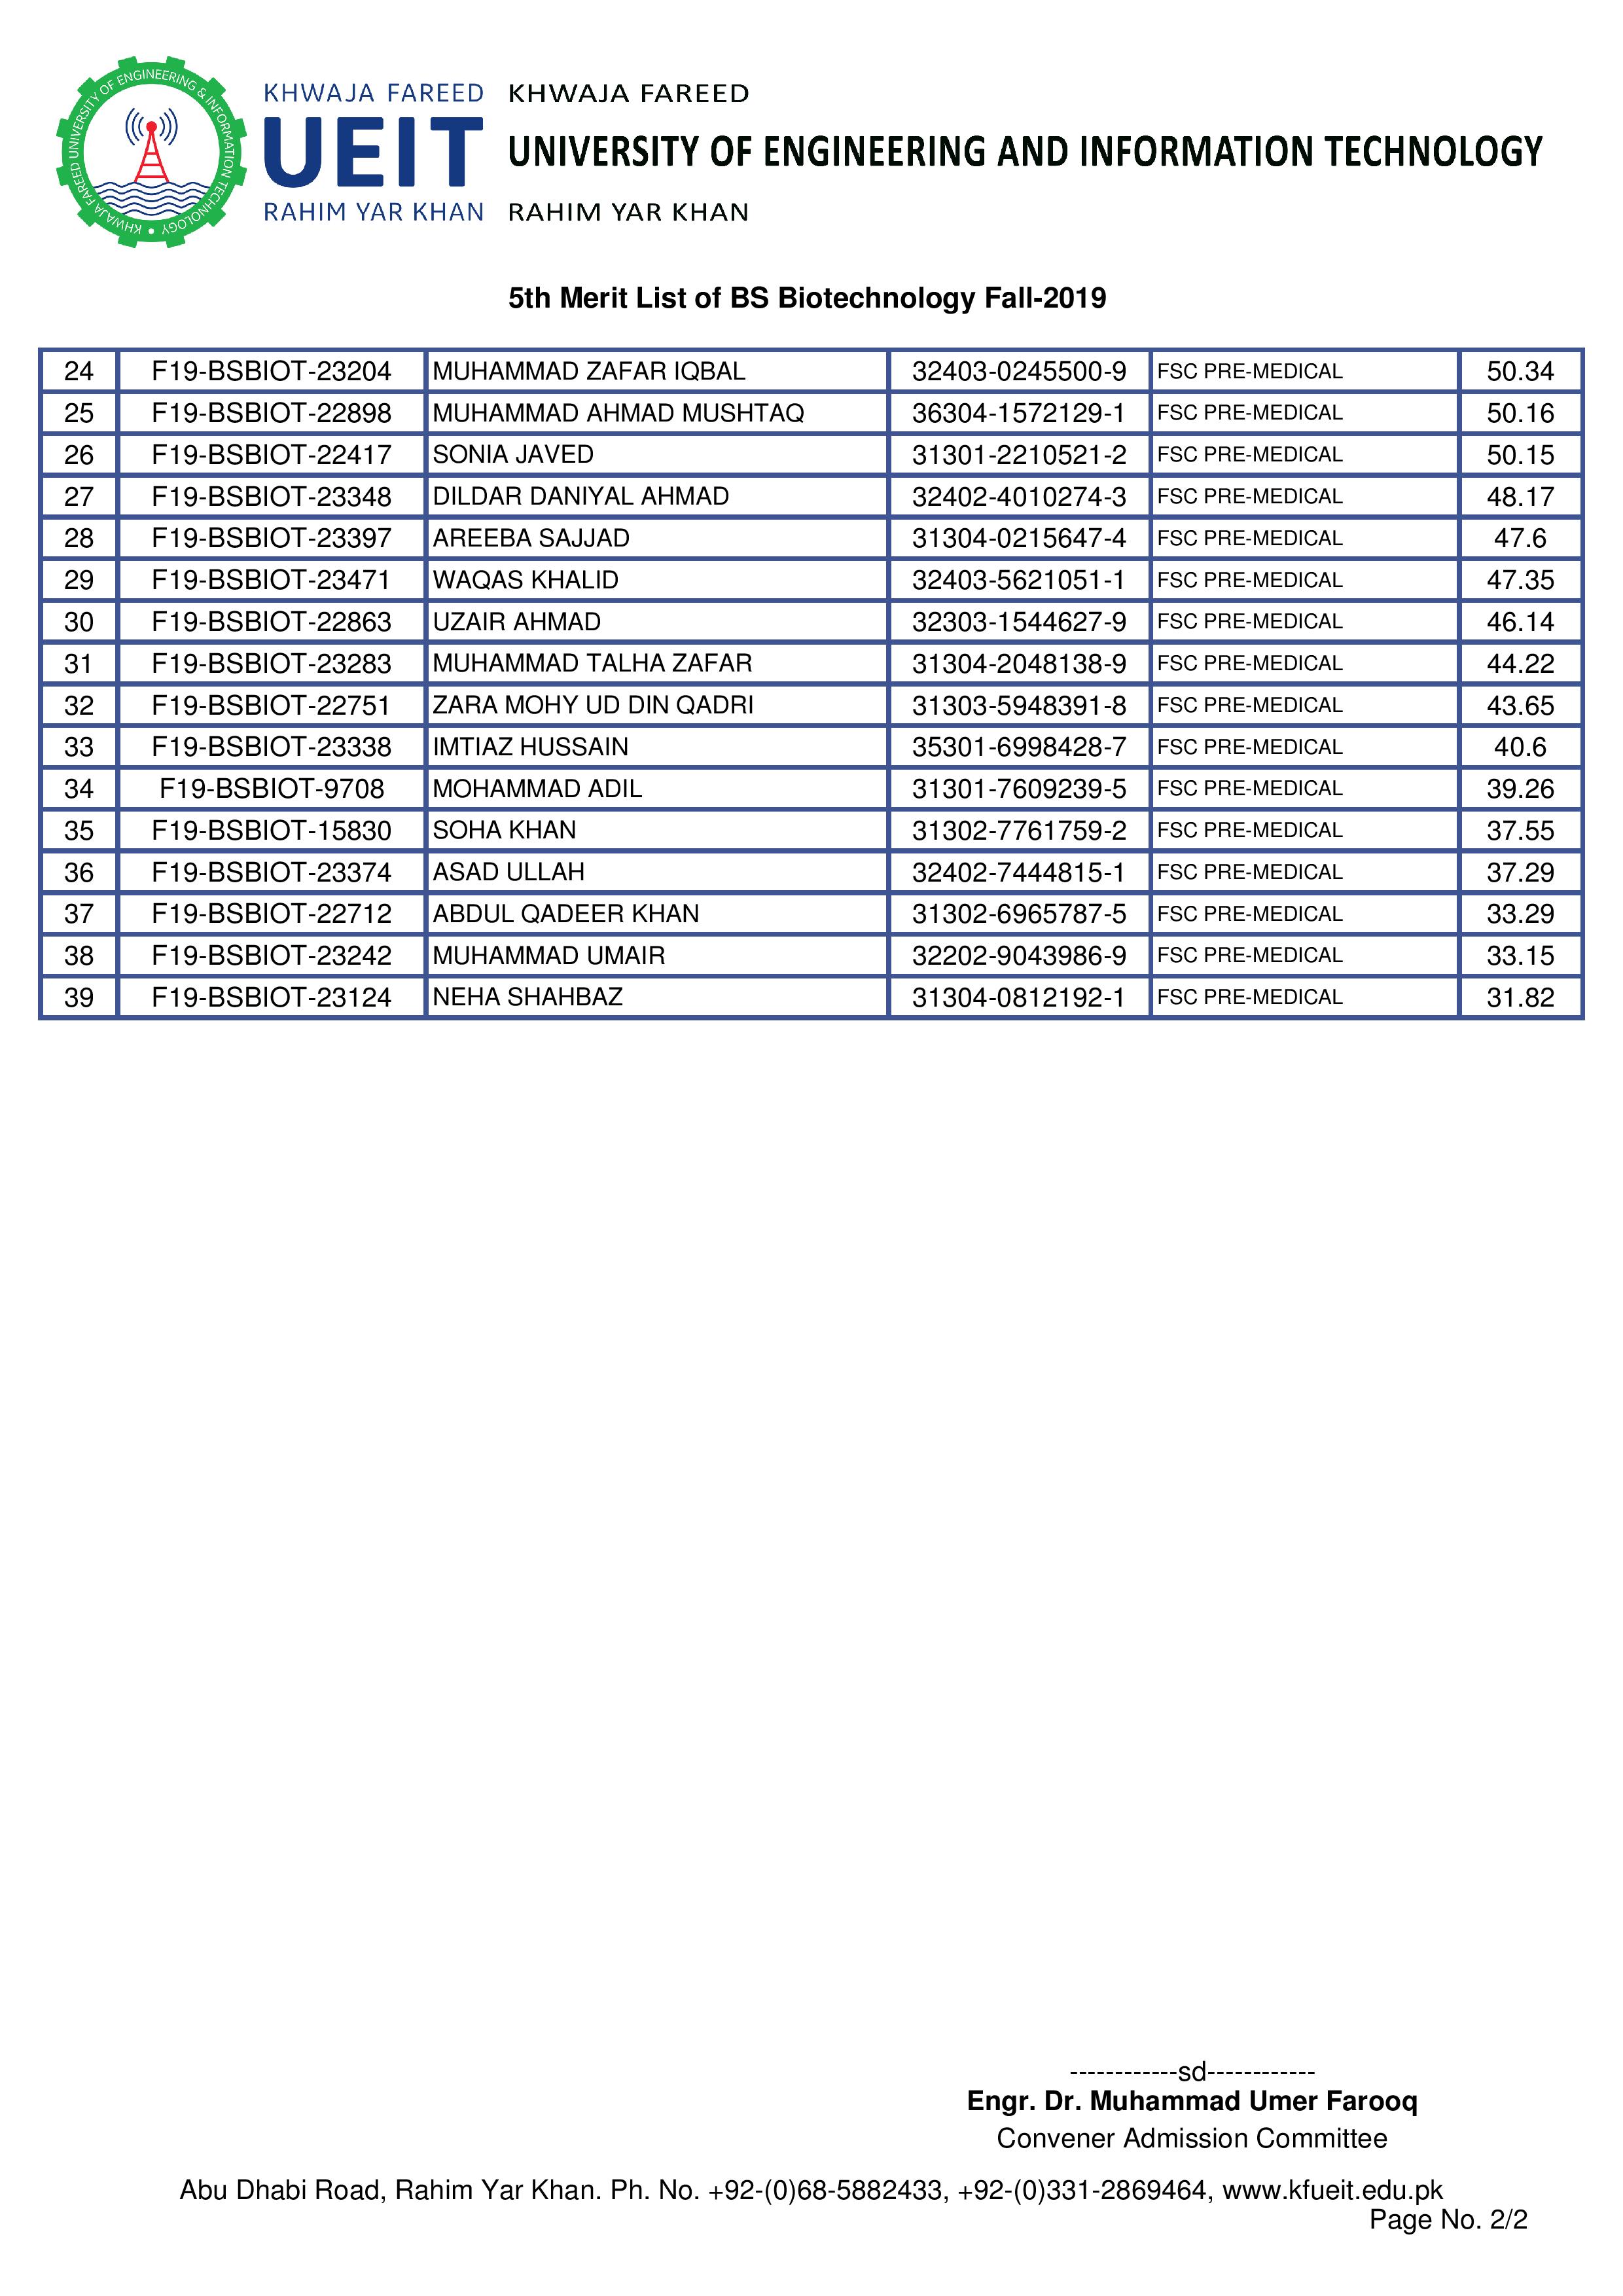 5th Merit List of BS Biotechnology Fall-2019-page-002